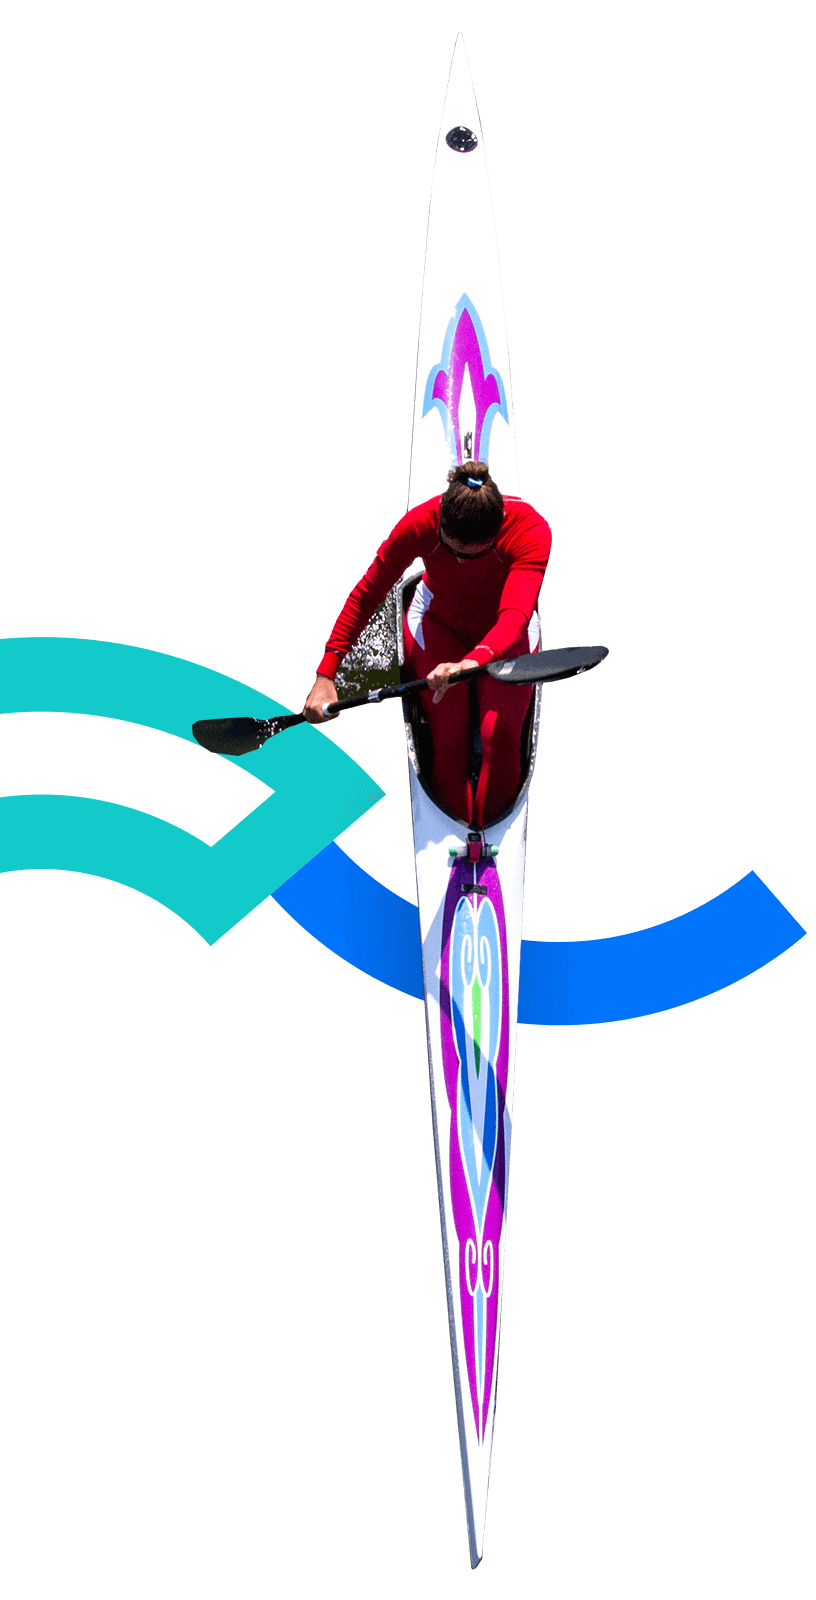 In the picture, there is an aerial view of a female athlete sitting on a kayak. She is wearing red and is holding a two blade paddle. 